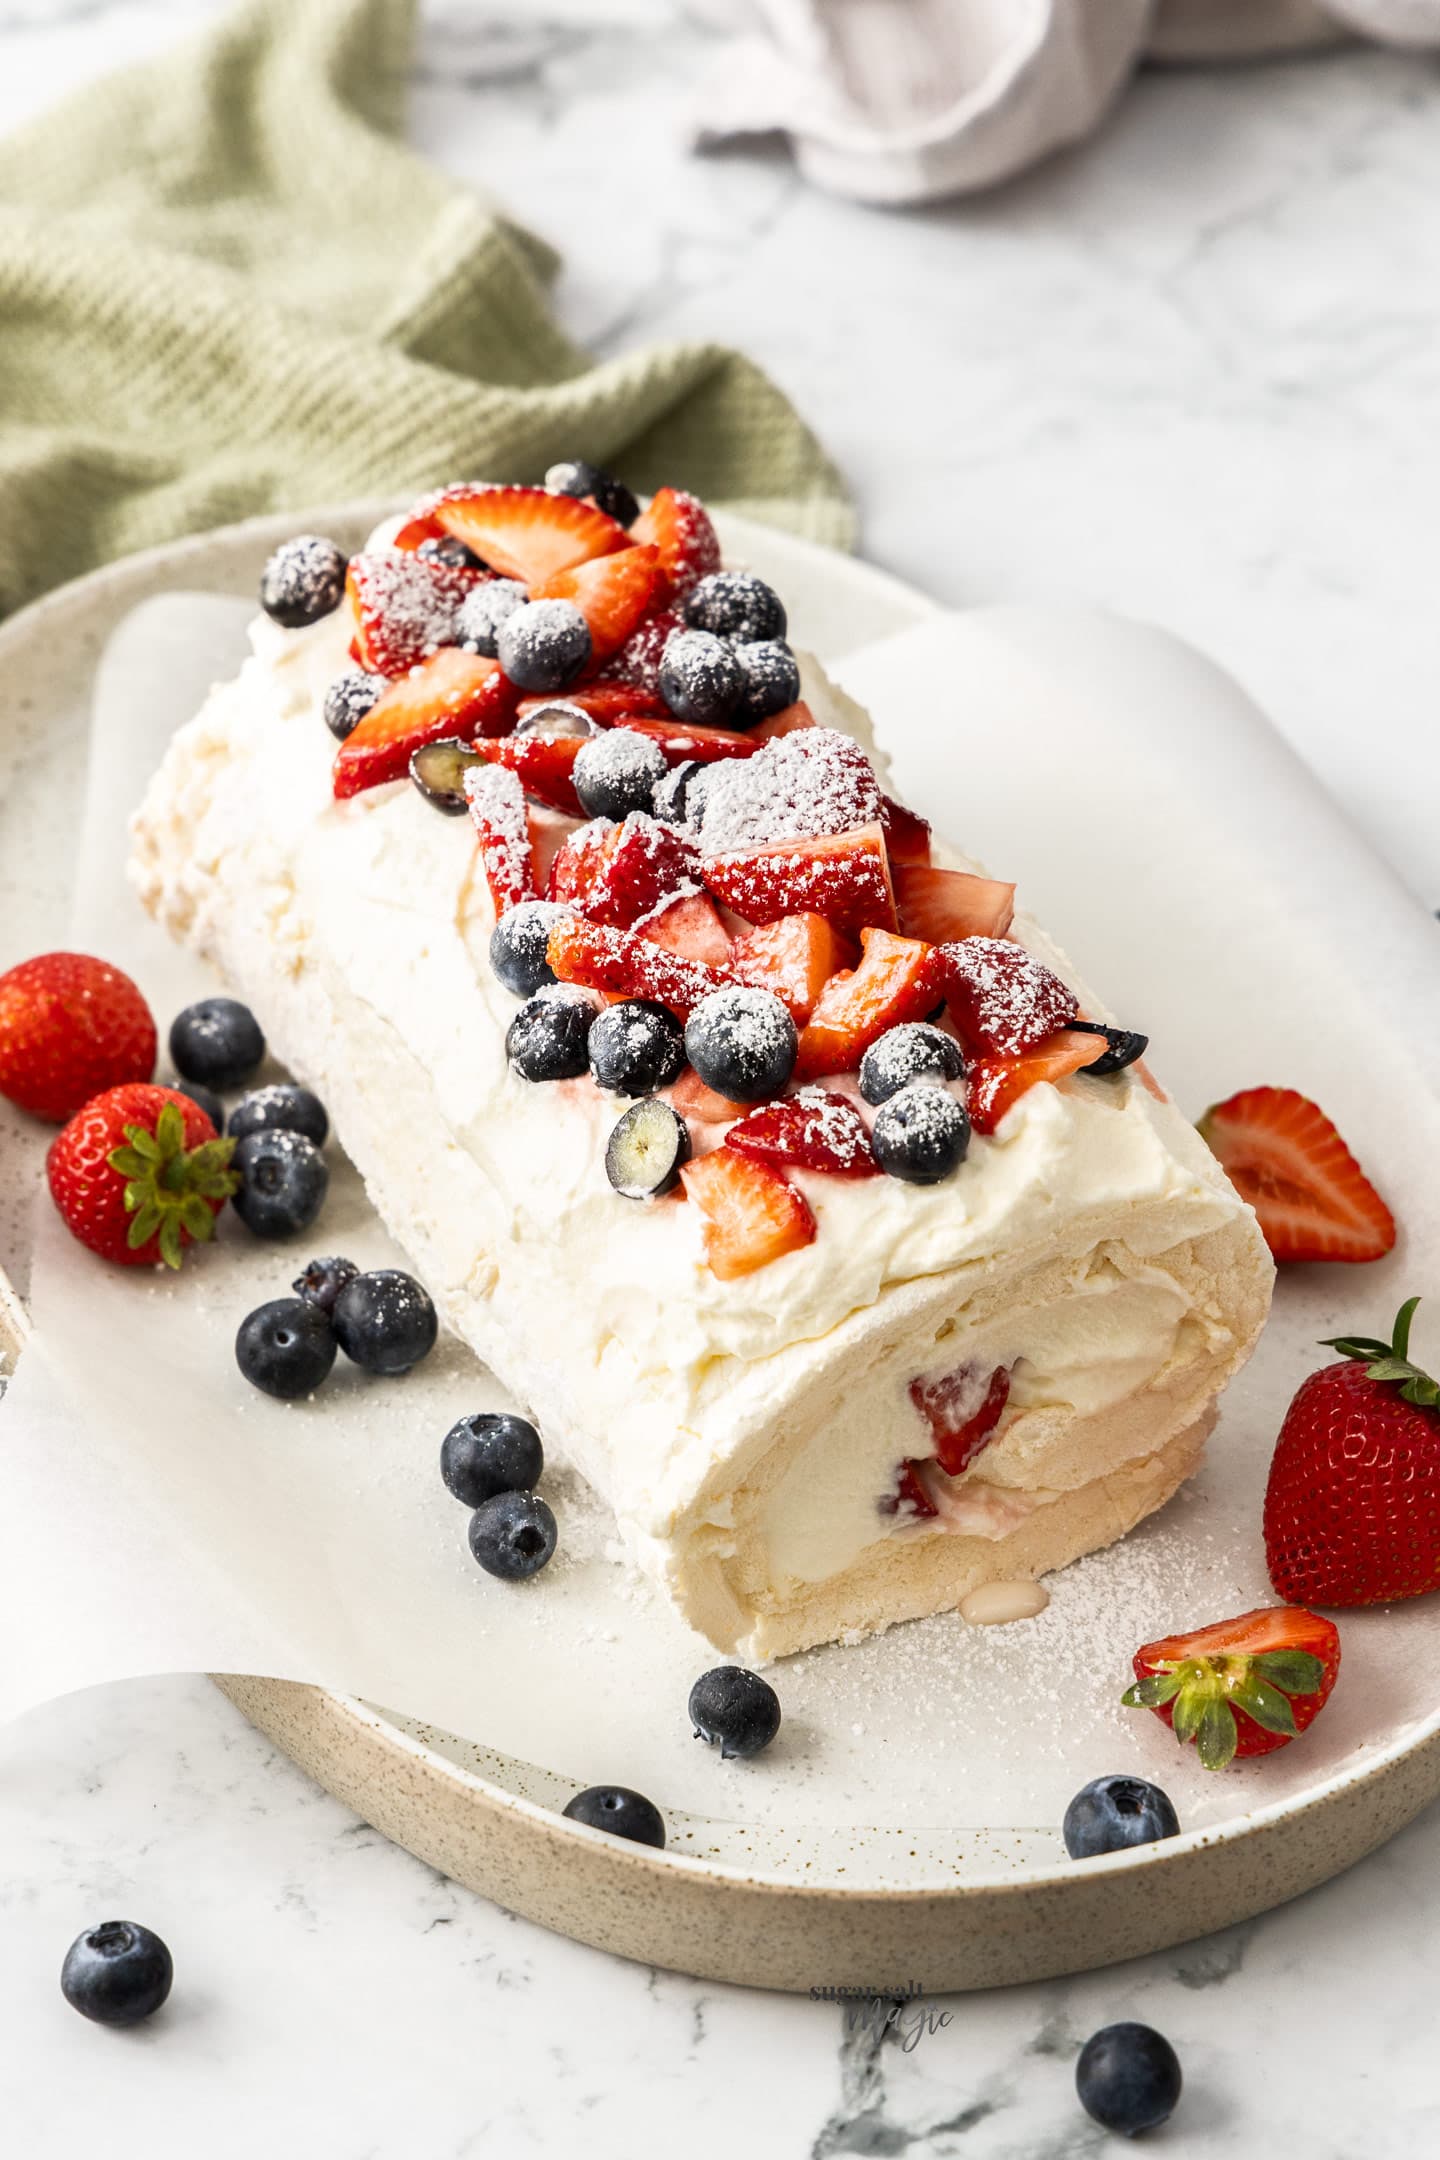 A meringue roulade on a long serving plate.